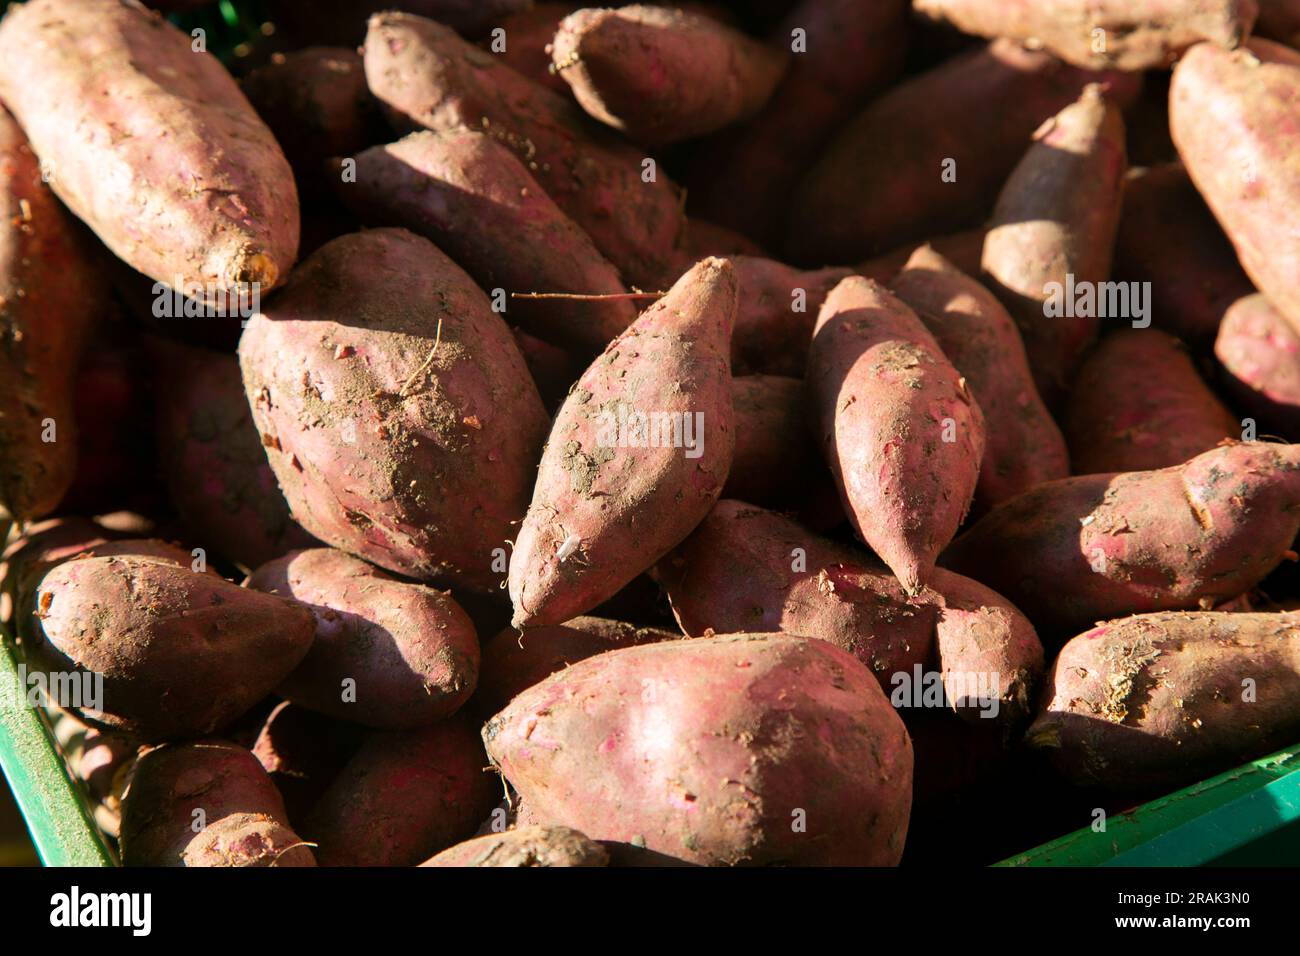 Variety of Peruvian tubers from the Peruvian jungle area in the Amazon. Stock Photo